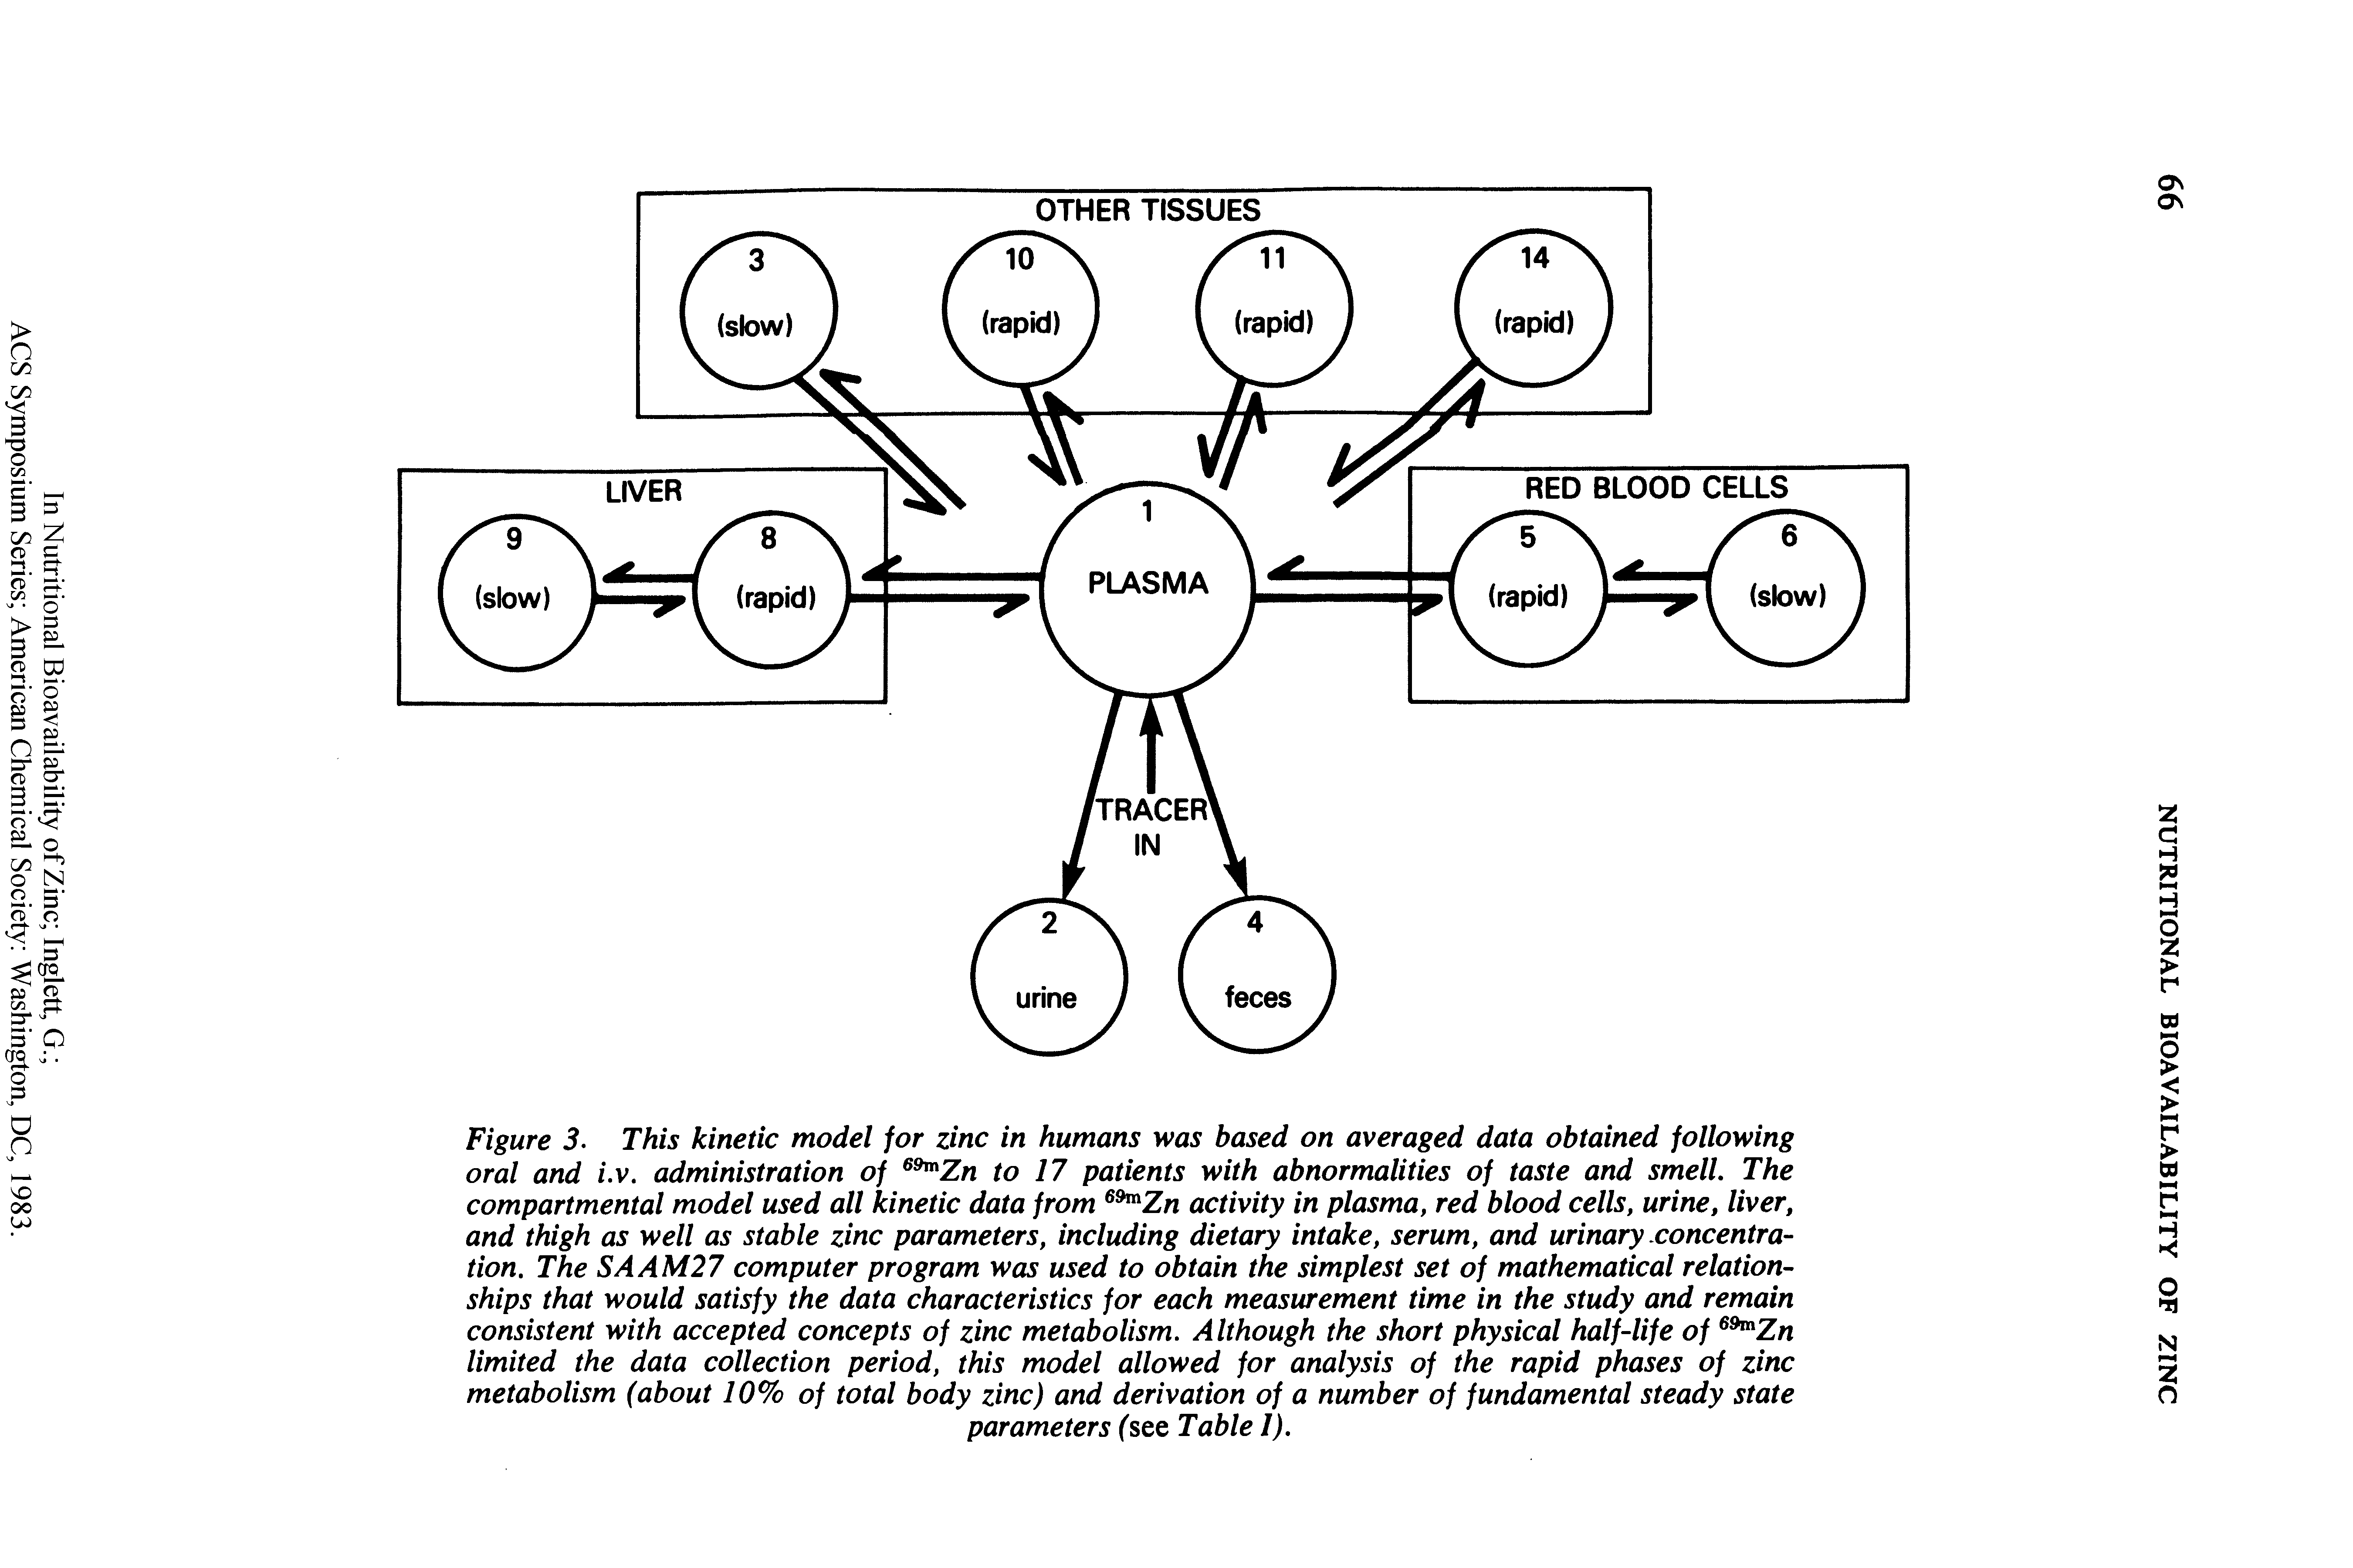 Figure 3. This kinetic model for zinc in humans was based on averaged data obtained following oral and i.v. administration of Zn to 17 patients with abnormalities of taste and smell. The compartmental model used all kinetic data from Zn activity in plasma, red blood cells, urine, liver, and thigh as well as stable zinc parameters, including dietary intake, serum, and urinary concentration. The SAAM27 computer program was used to obtain the simplest set of mathematical relationships that would satisfy the data characteristics for each measurement time in the study and remain consistent with accepted concepts of zinc metabolism. Although the short physical half-life of Zn limited the data collection period, this model allowed for analysis of the rapid phases of zinc metabolism (about 10% of total body zinc) and derivation of a number of fundamental steady state...